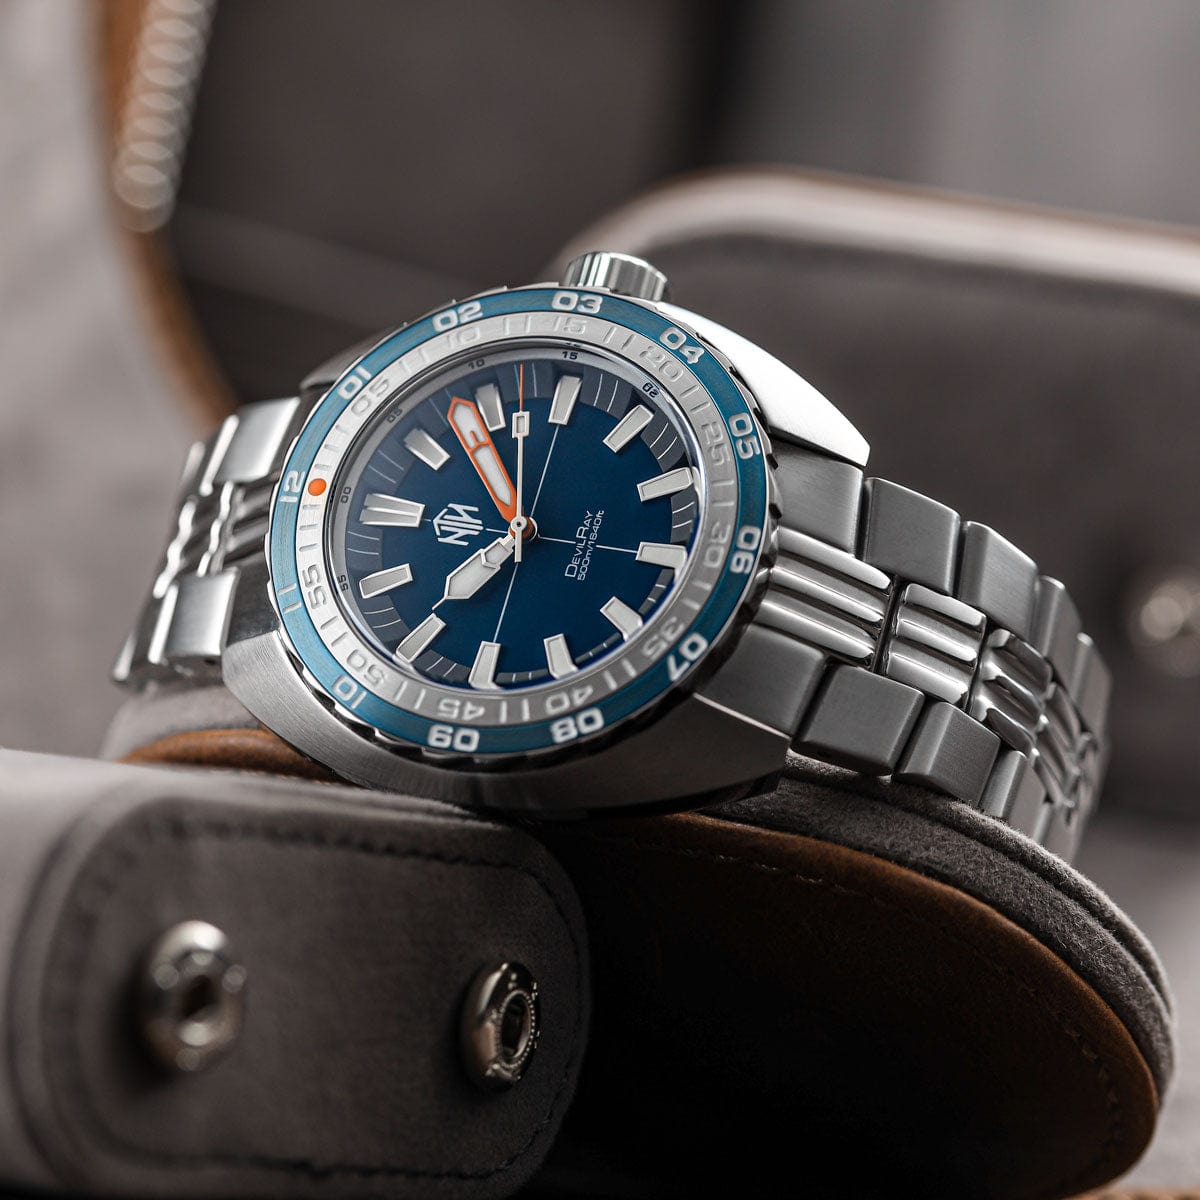 NTH DevilRay Dive Watch - Blue - Leather Strap - WatchGecko Exclusive